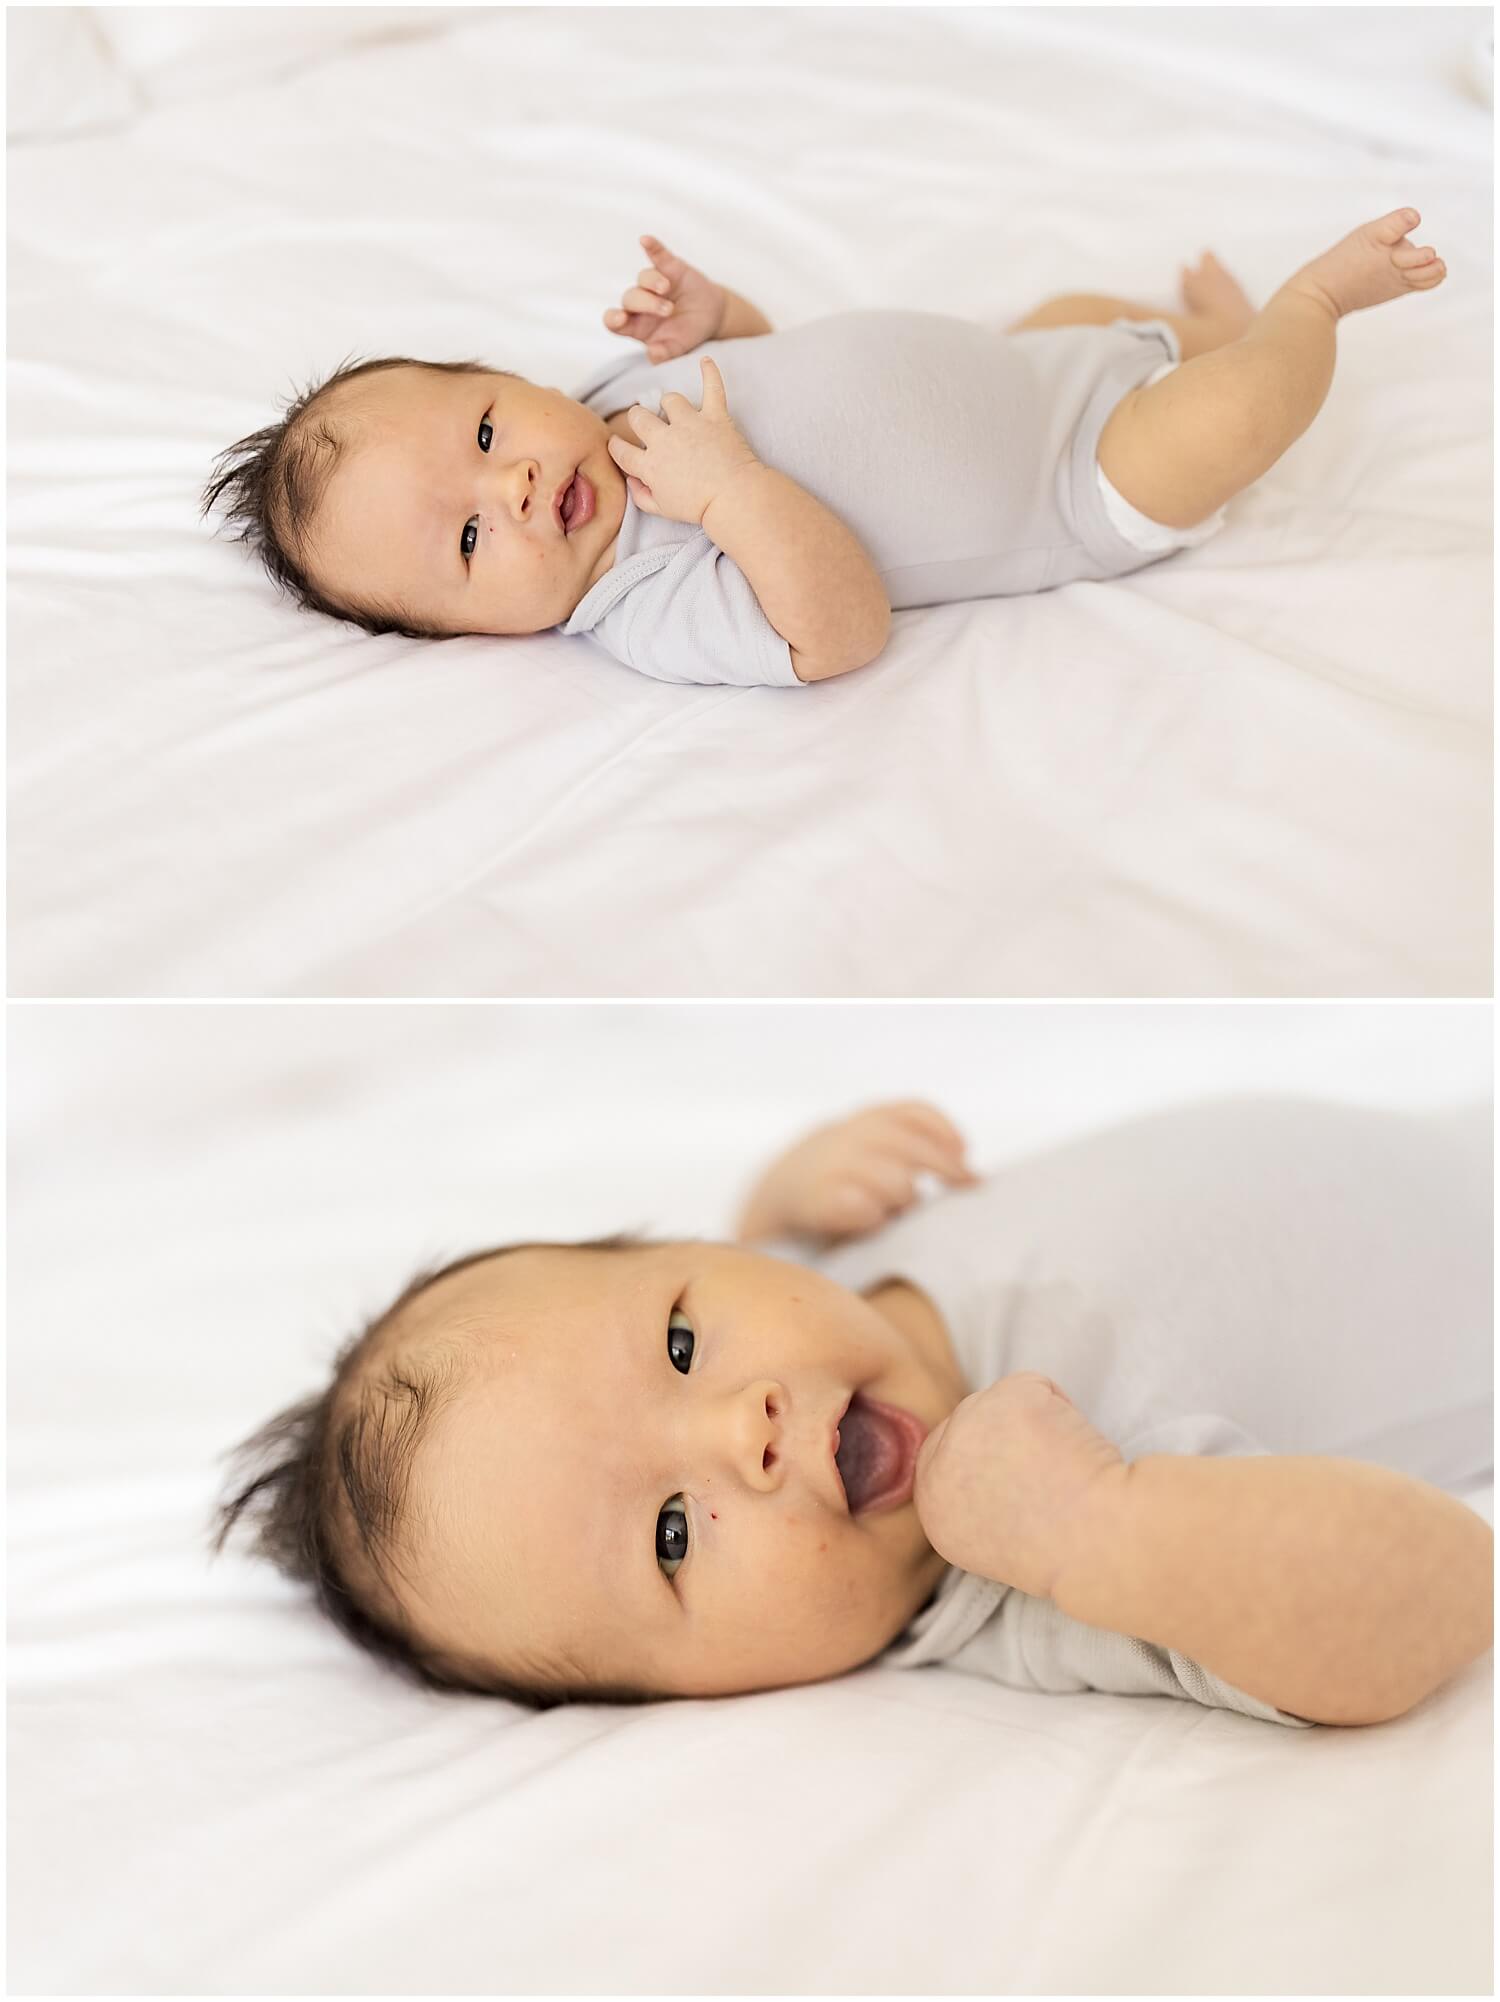 Baby in a gray onesie laying on bed by Elle Rose photo